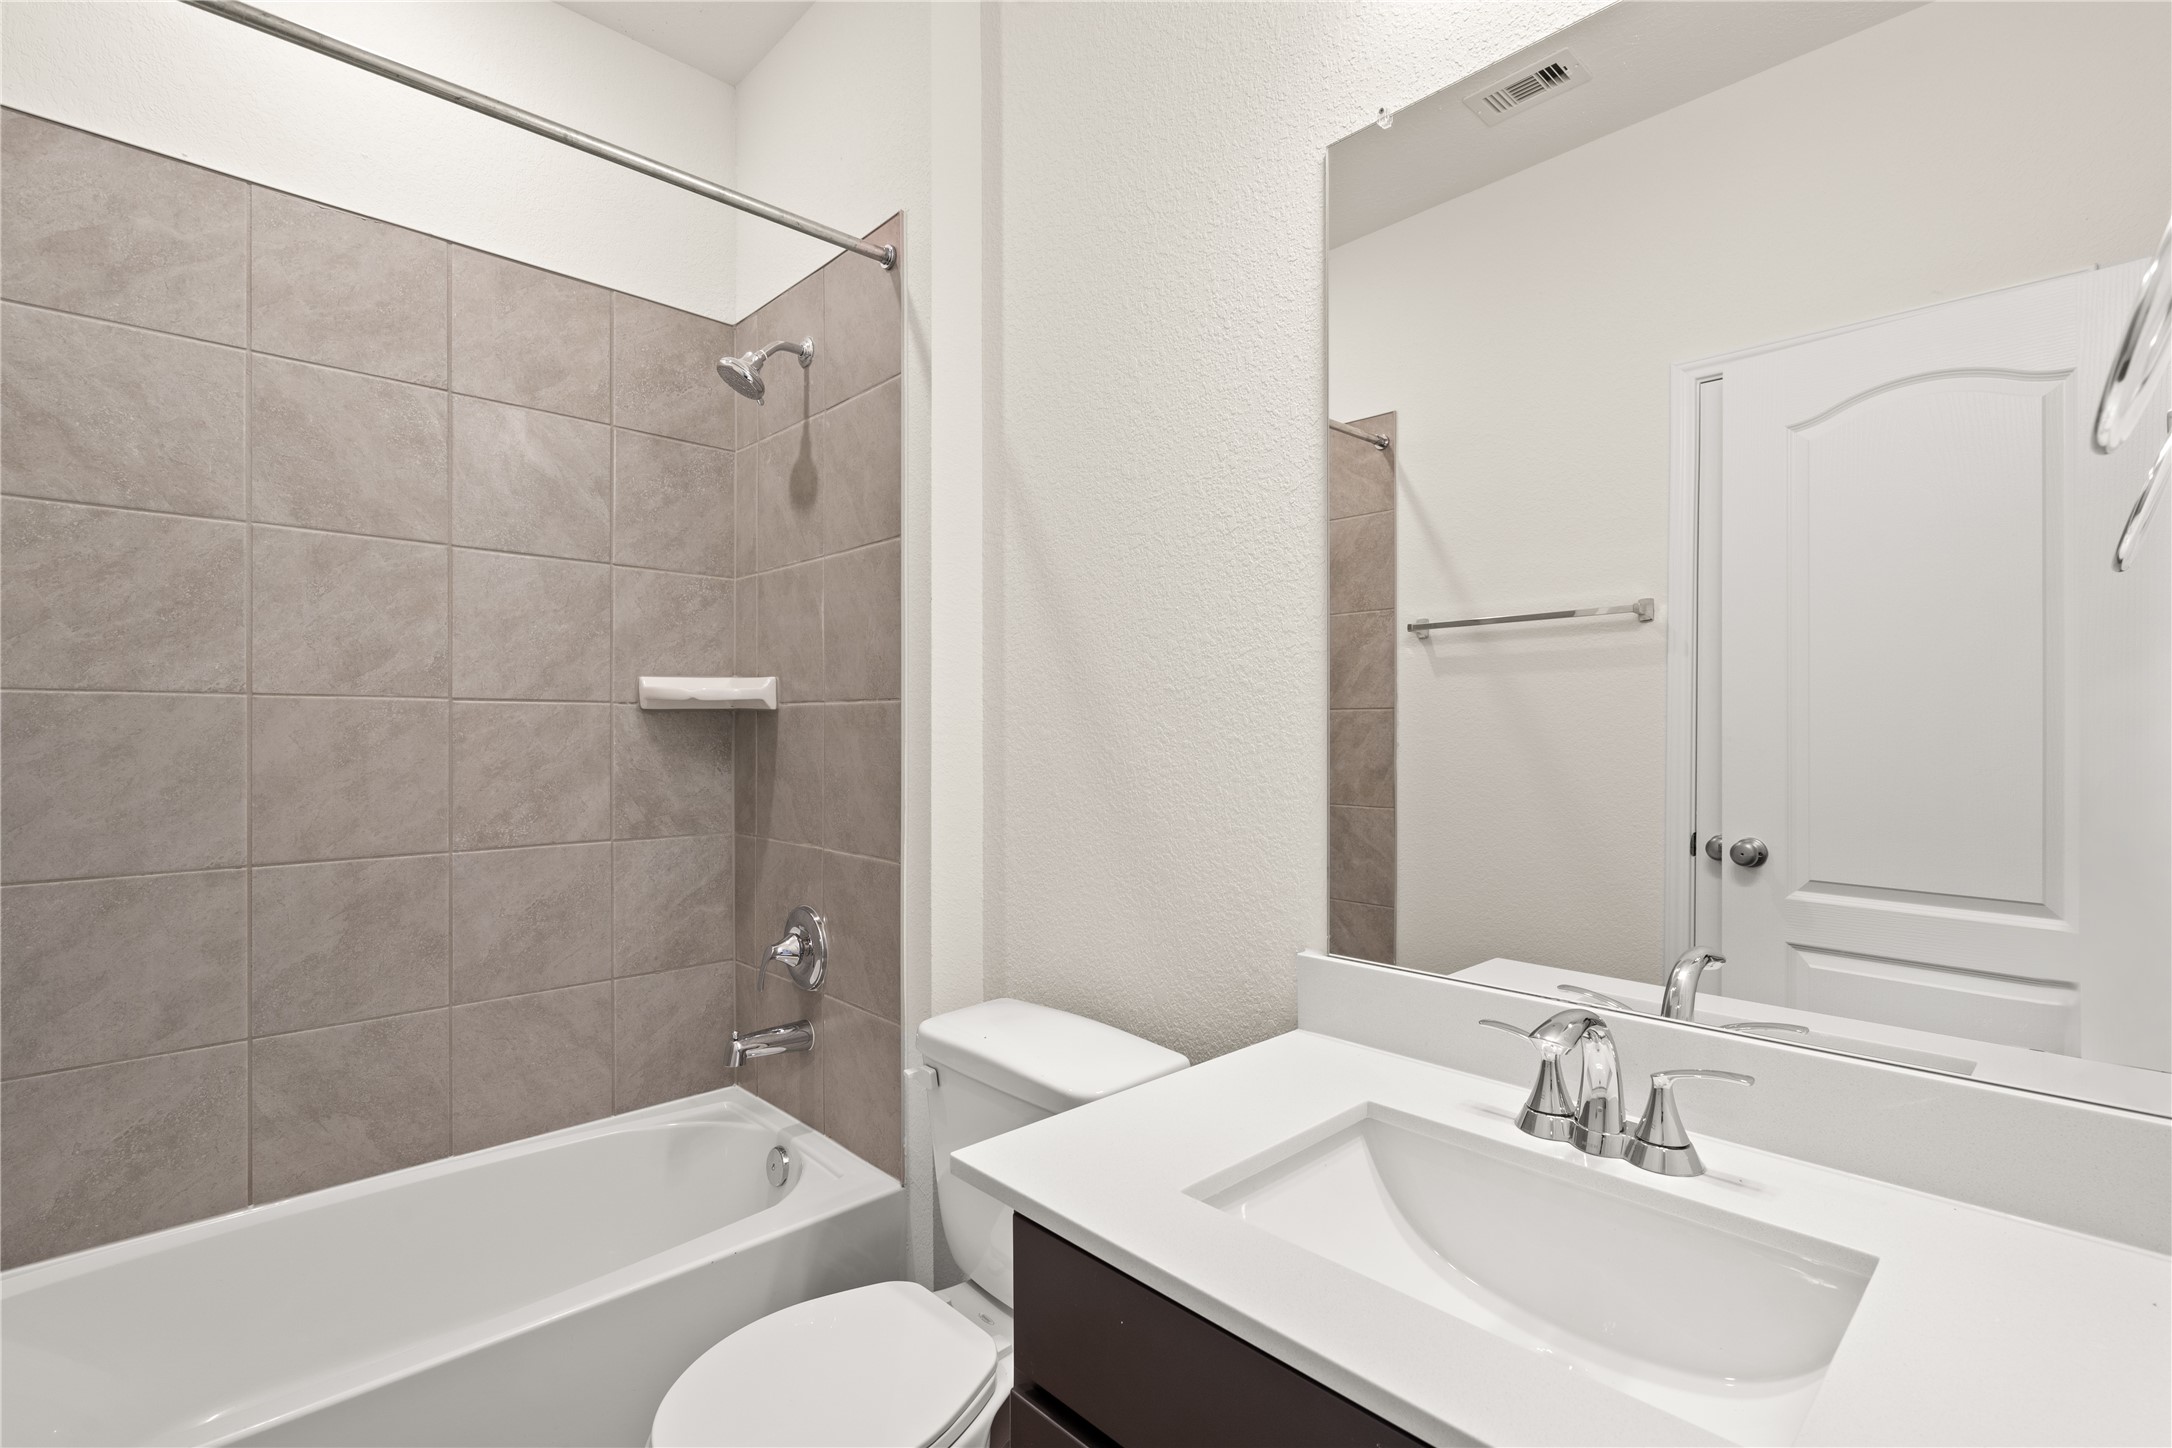 Secondary bath features tile flooring, bath/shower combo with tile surround, dark wood cabinets, beautiful light countertops, mirror, dark, sleek fixtures and modern finishes.
